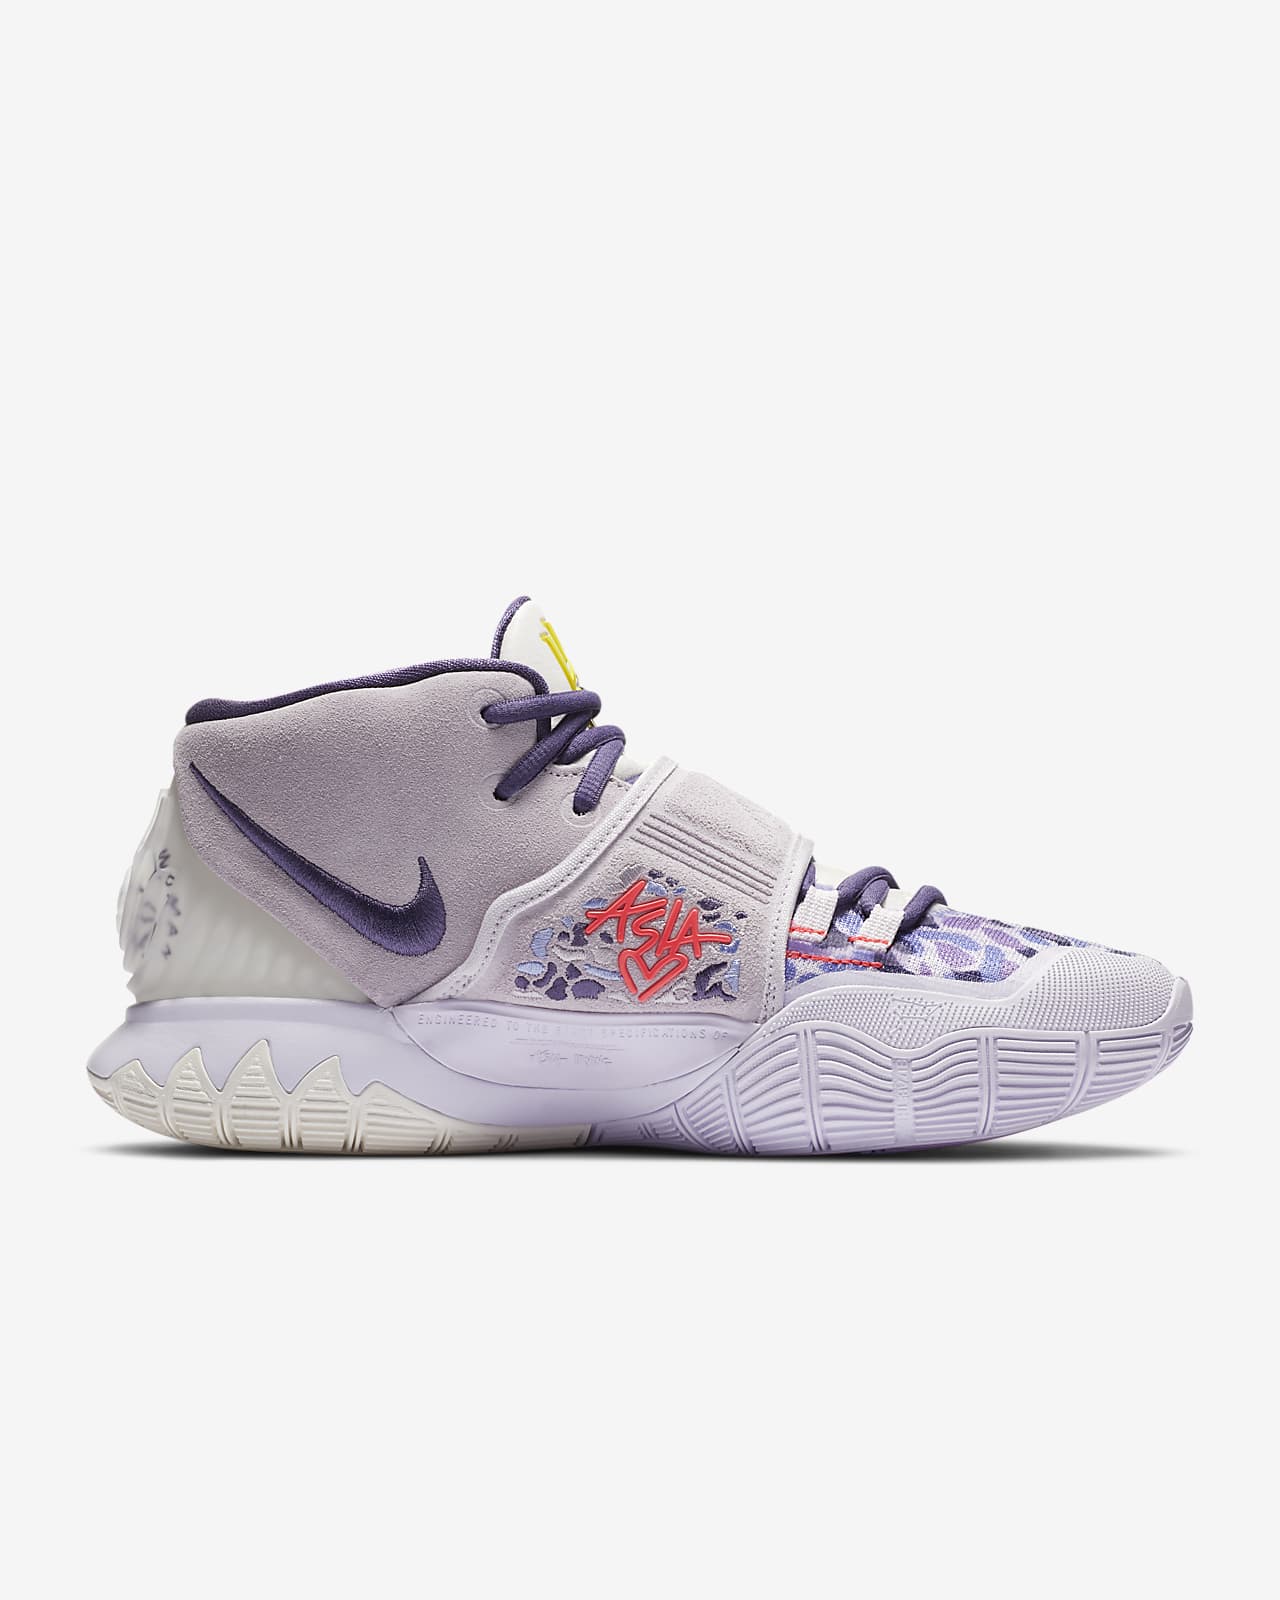 2020 NIKE KYRIE 6 VI EP THERE IS NO COMING BACK